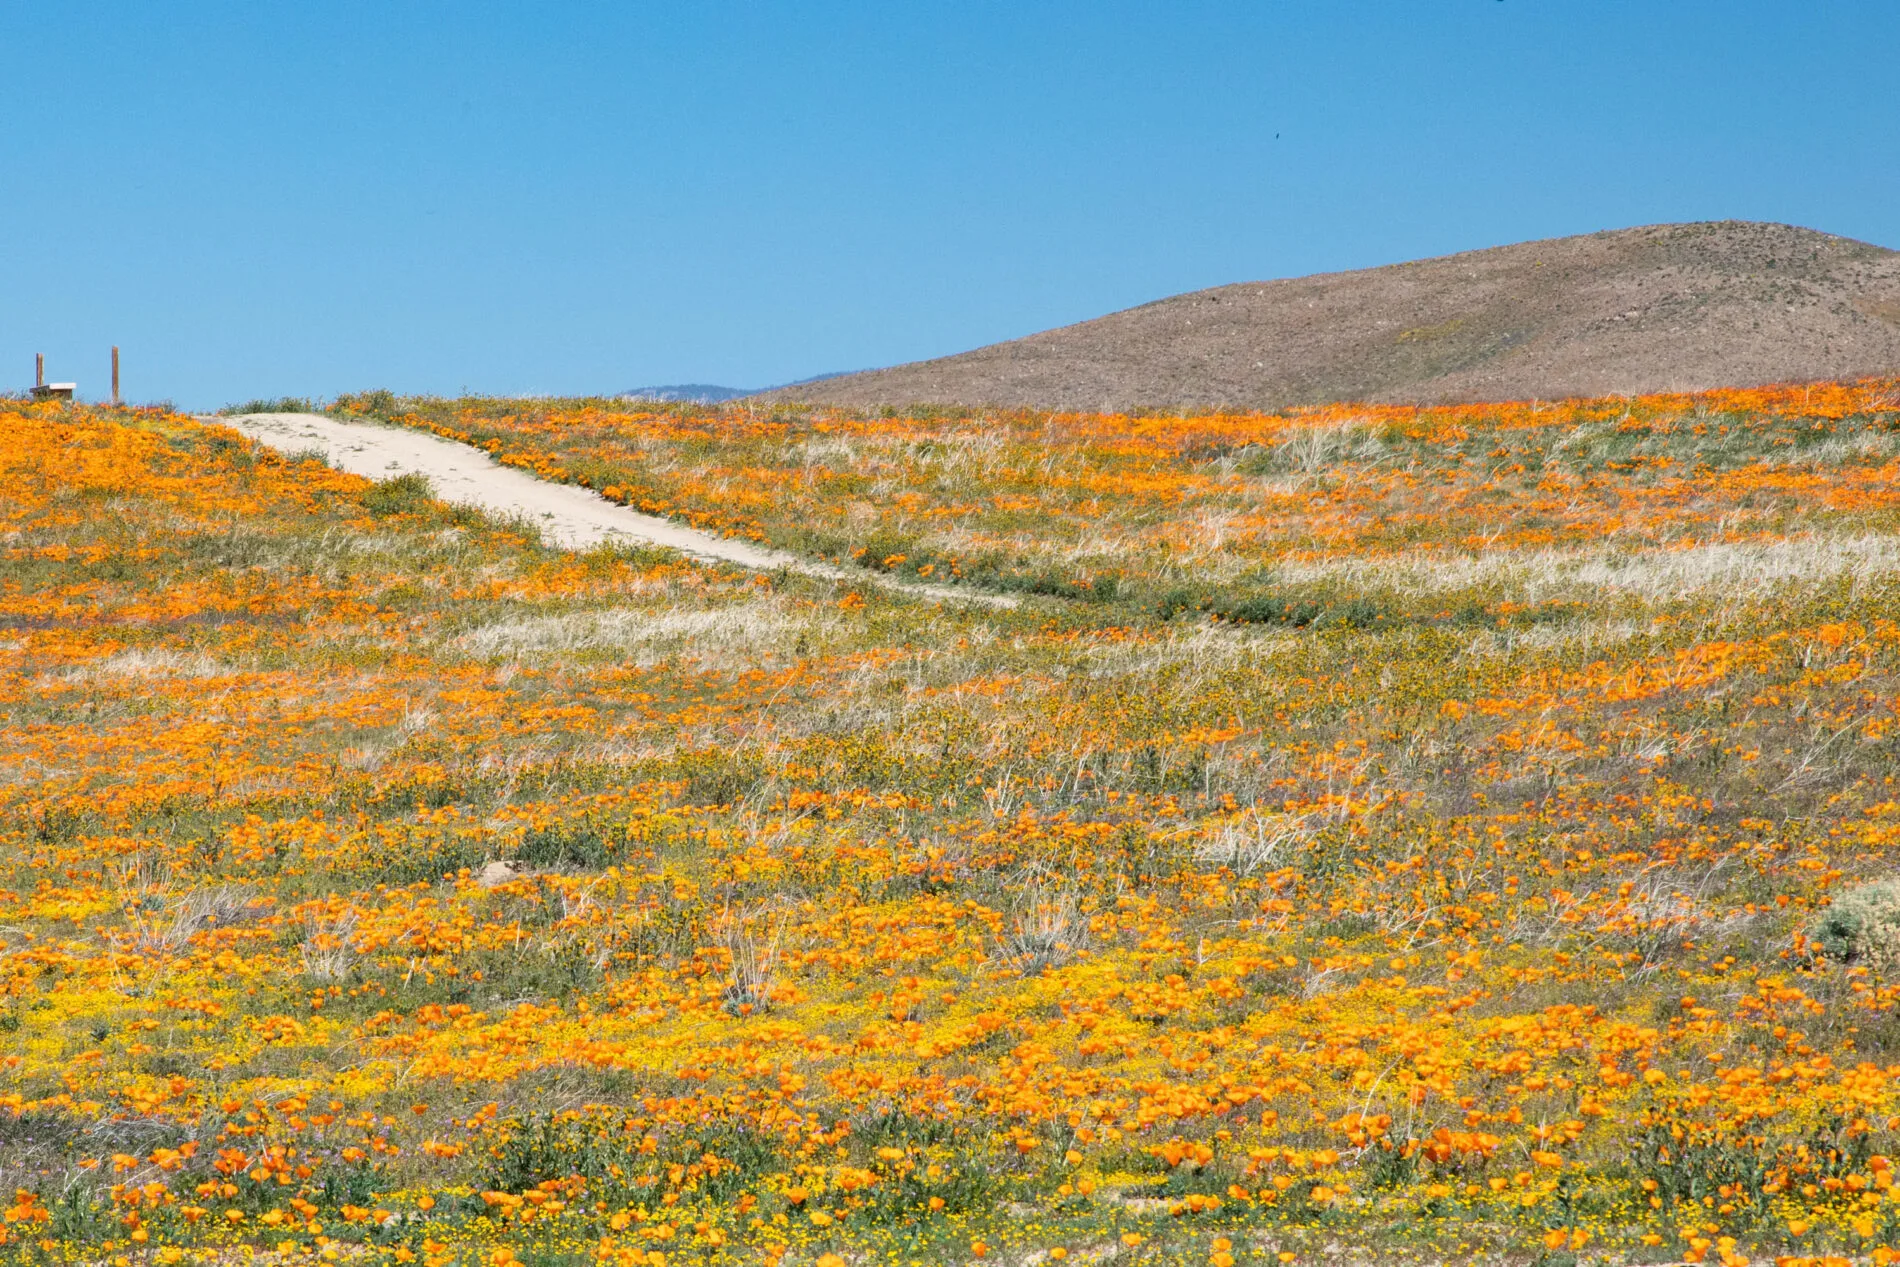 Eight miles of paved trails for walking through the poppies at the California Poppy Reserve, with thousands of golden poppies.